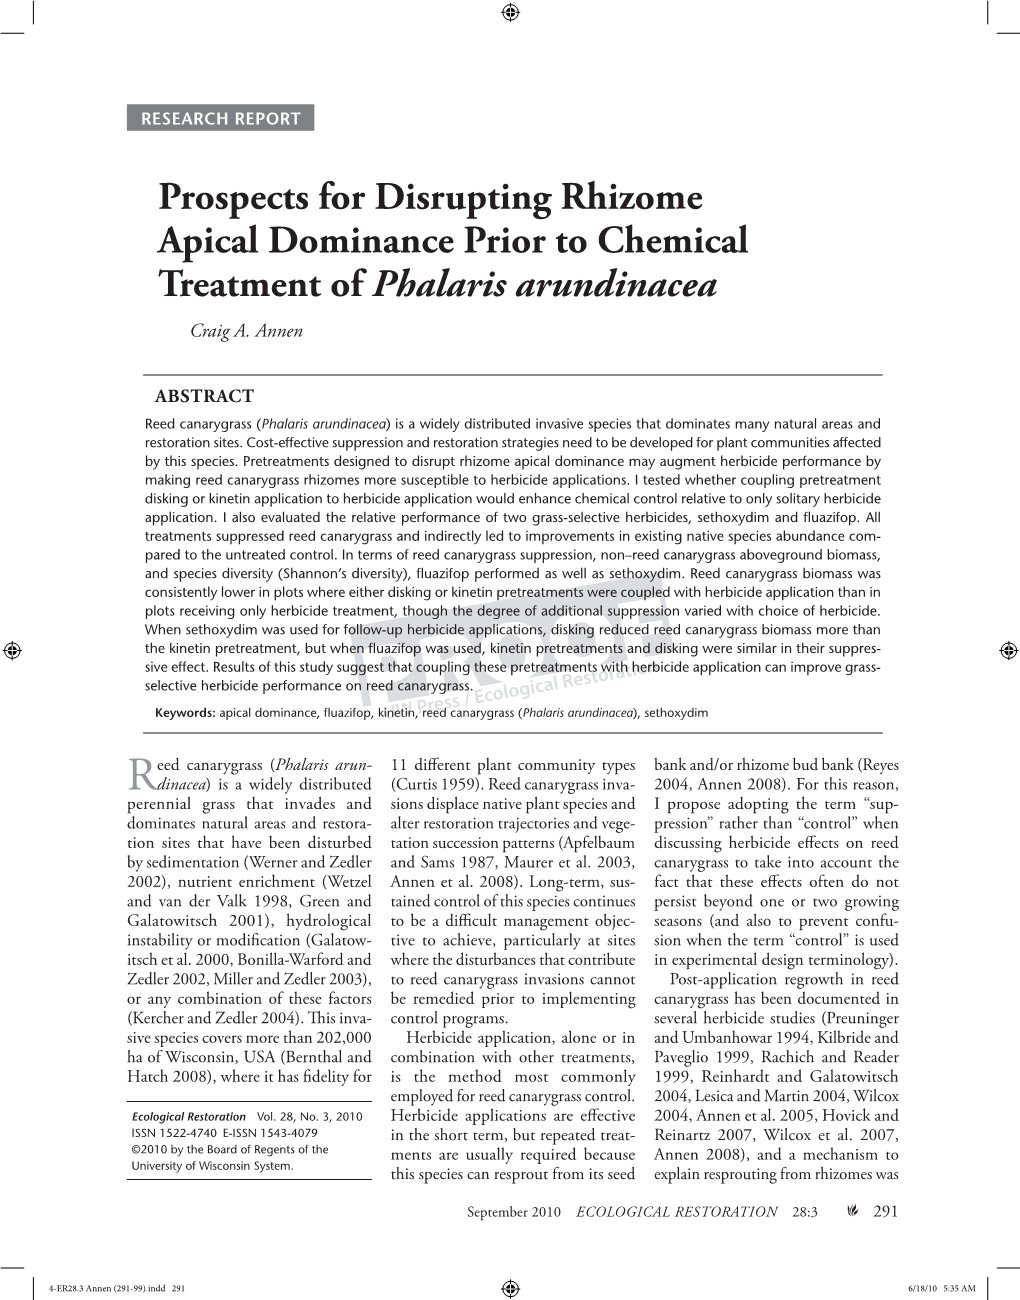 Prospects for Disrupting Rhizome Apical Dominance Prior to Chemical Treatment of Phalaris Arundinacea Craig A